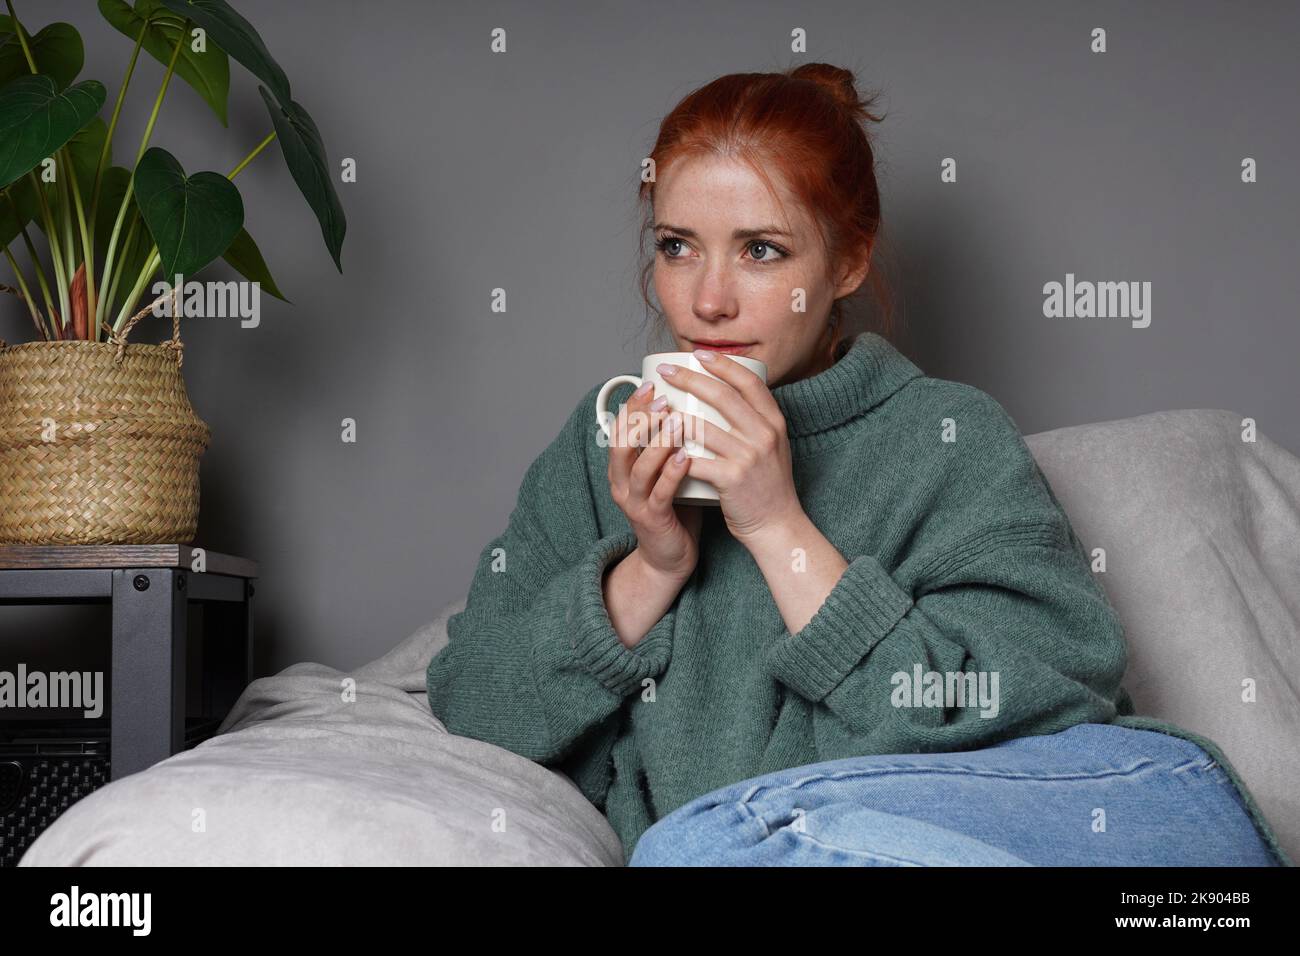 woman relaxing at home drinking coffee Stock Photo